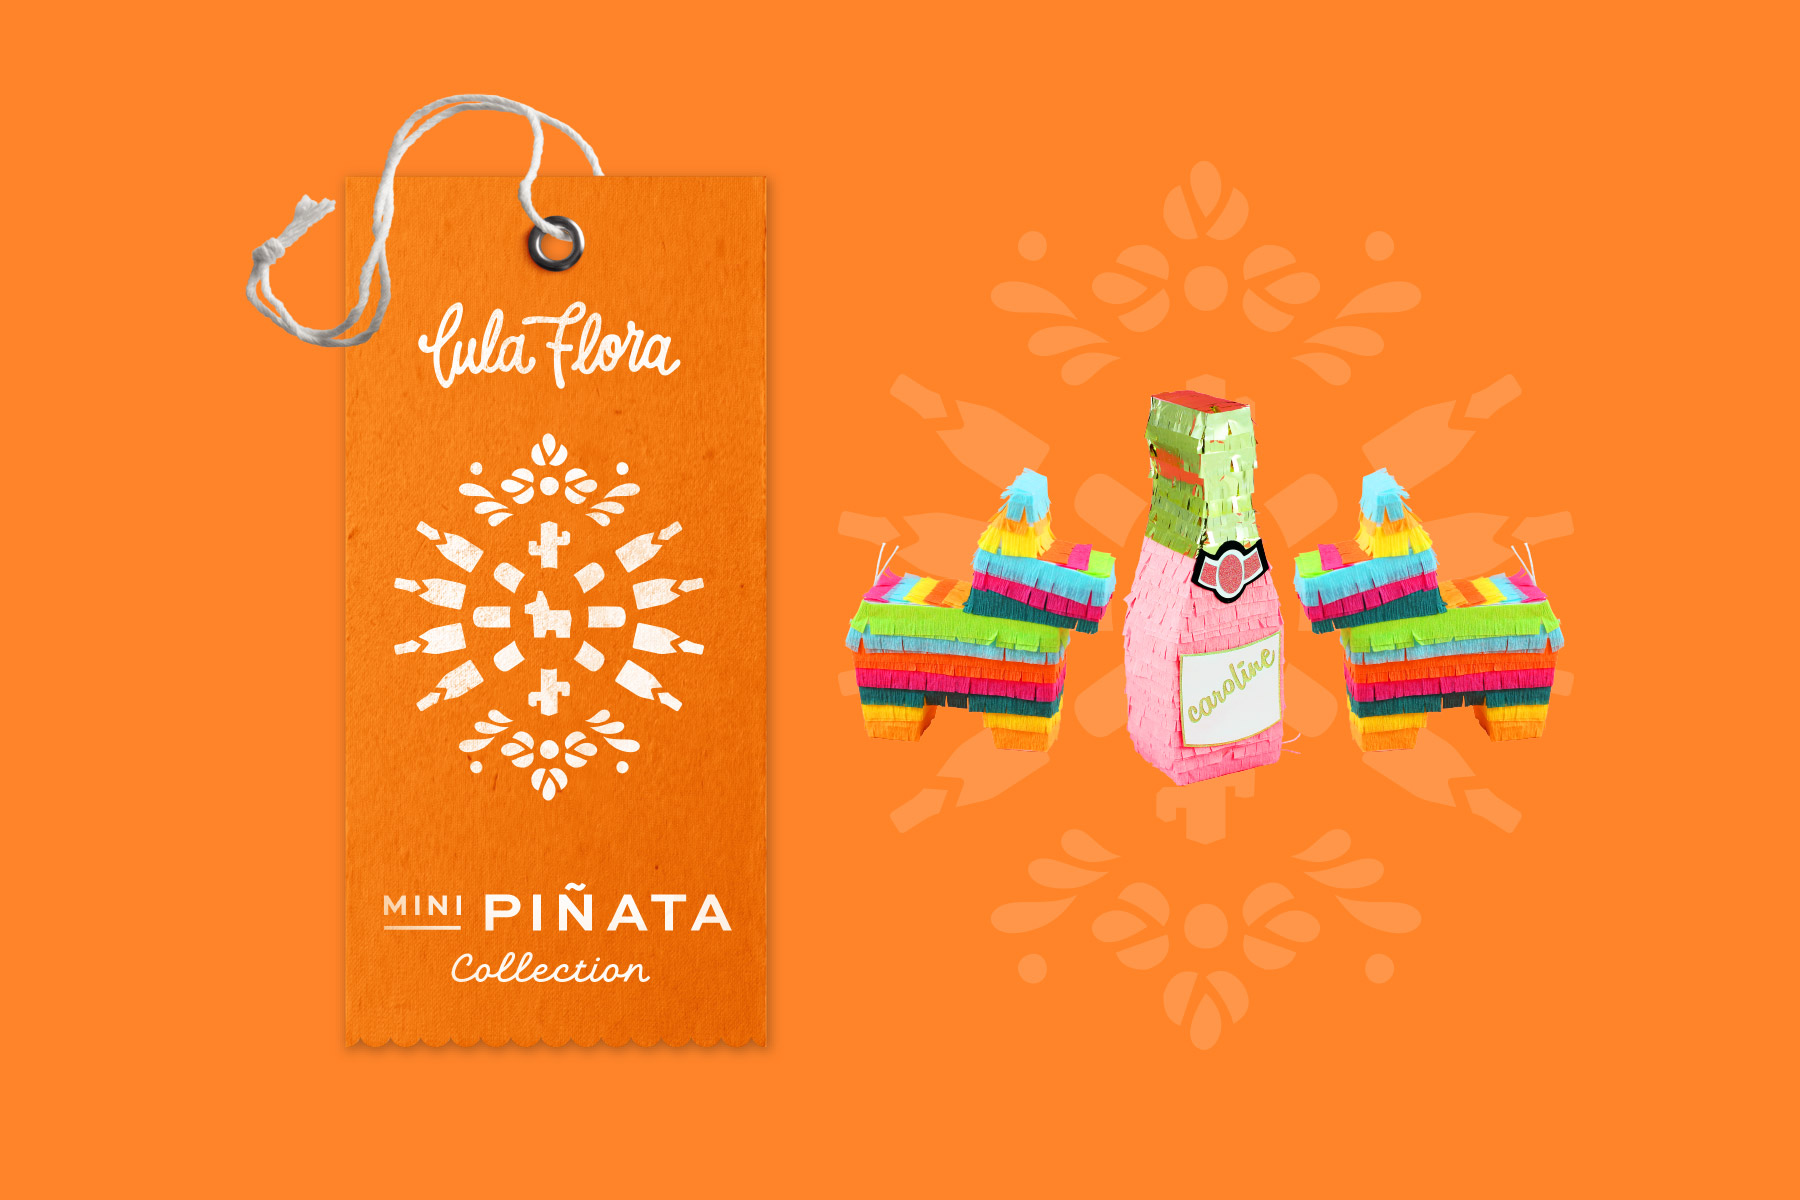 A beautifully designed product hang tag for piñatas